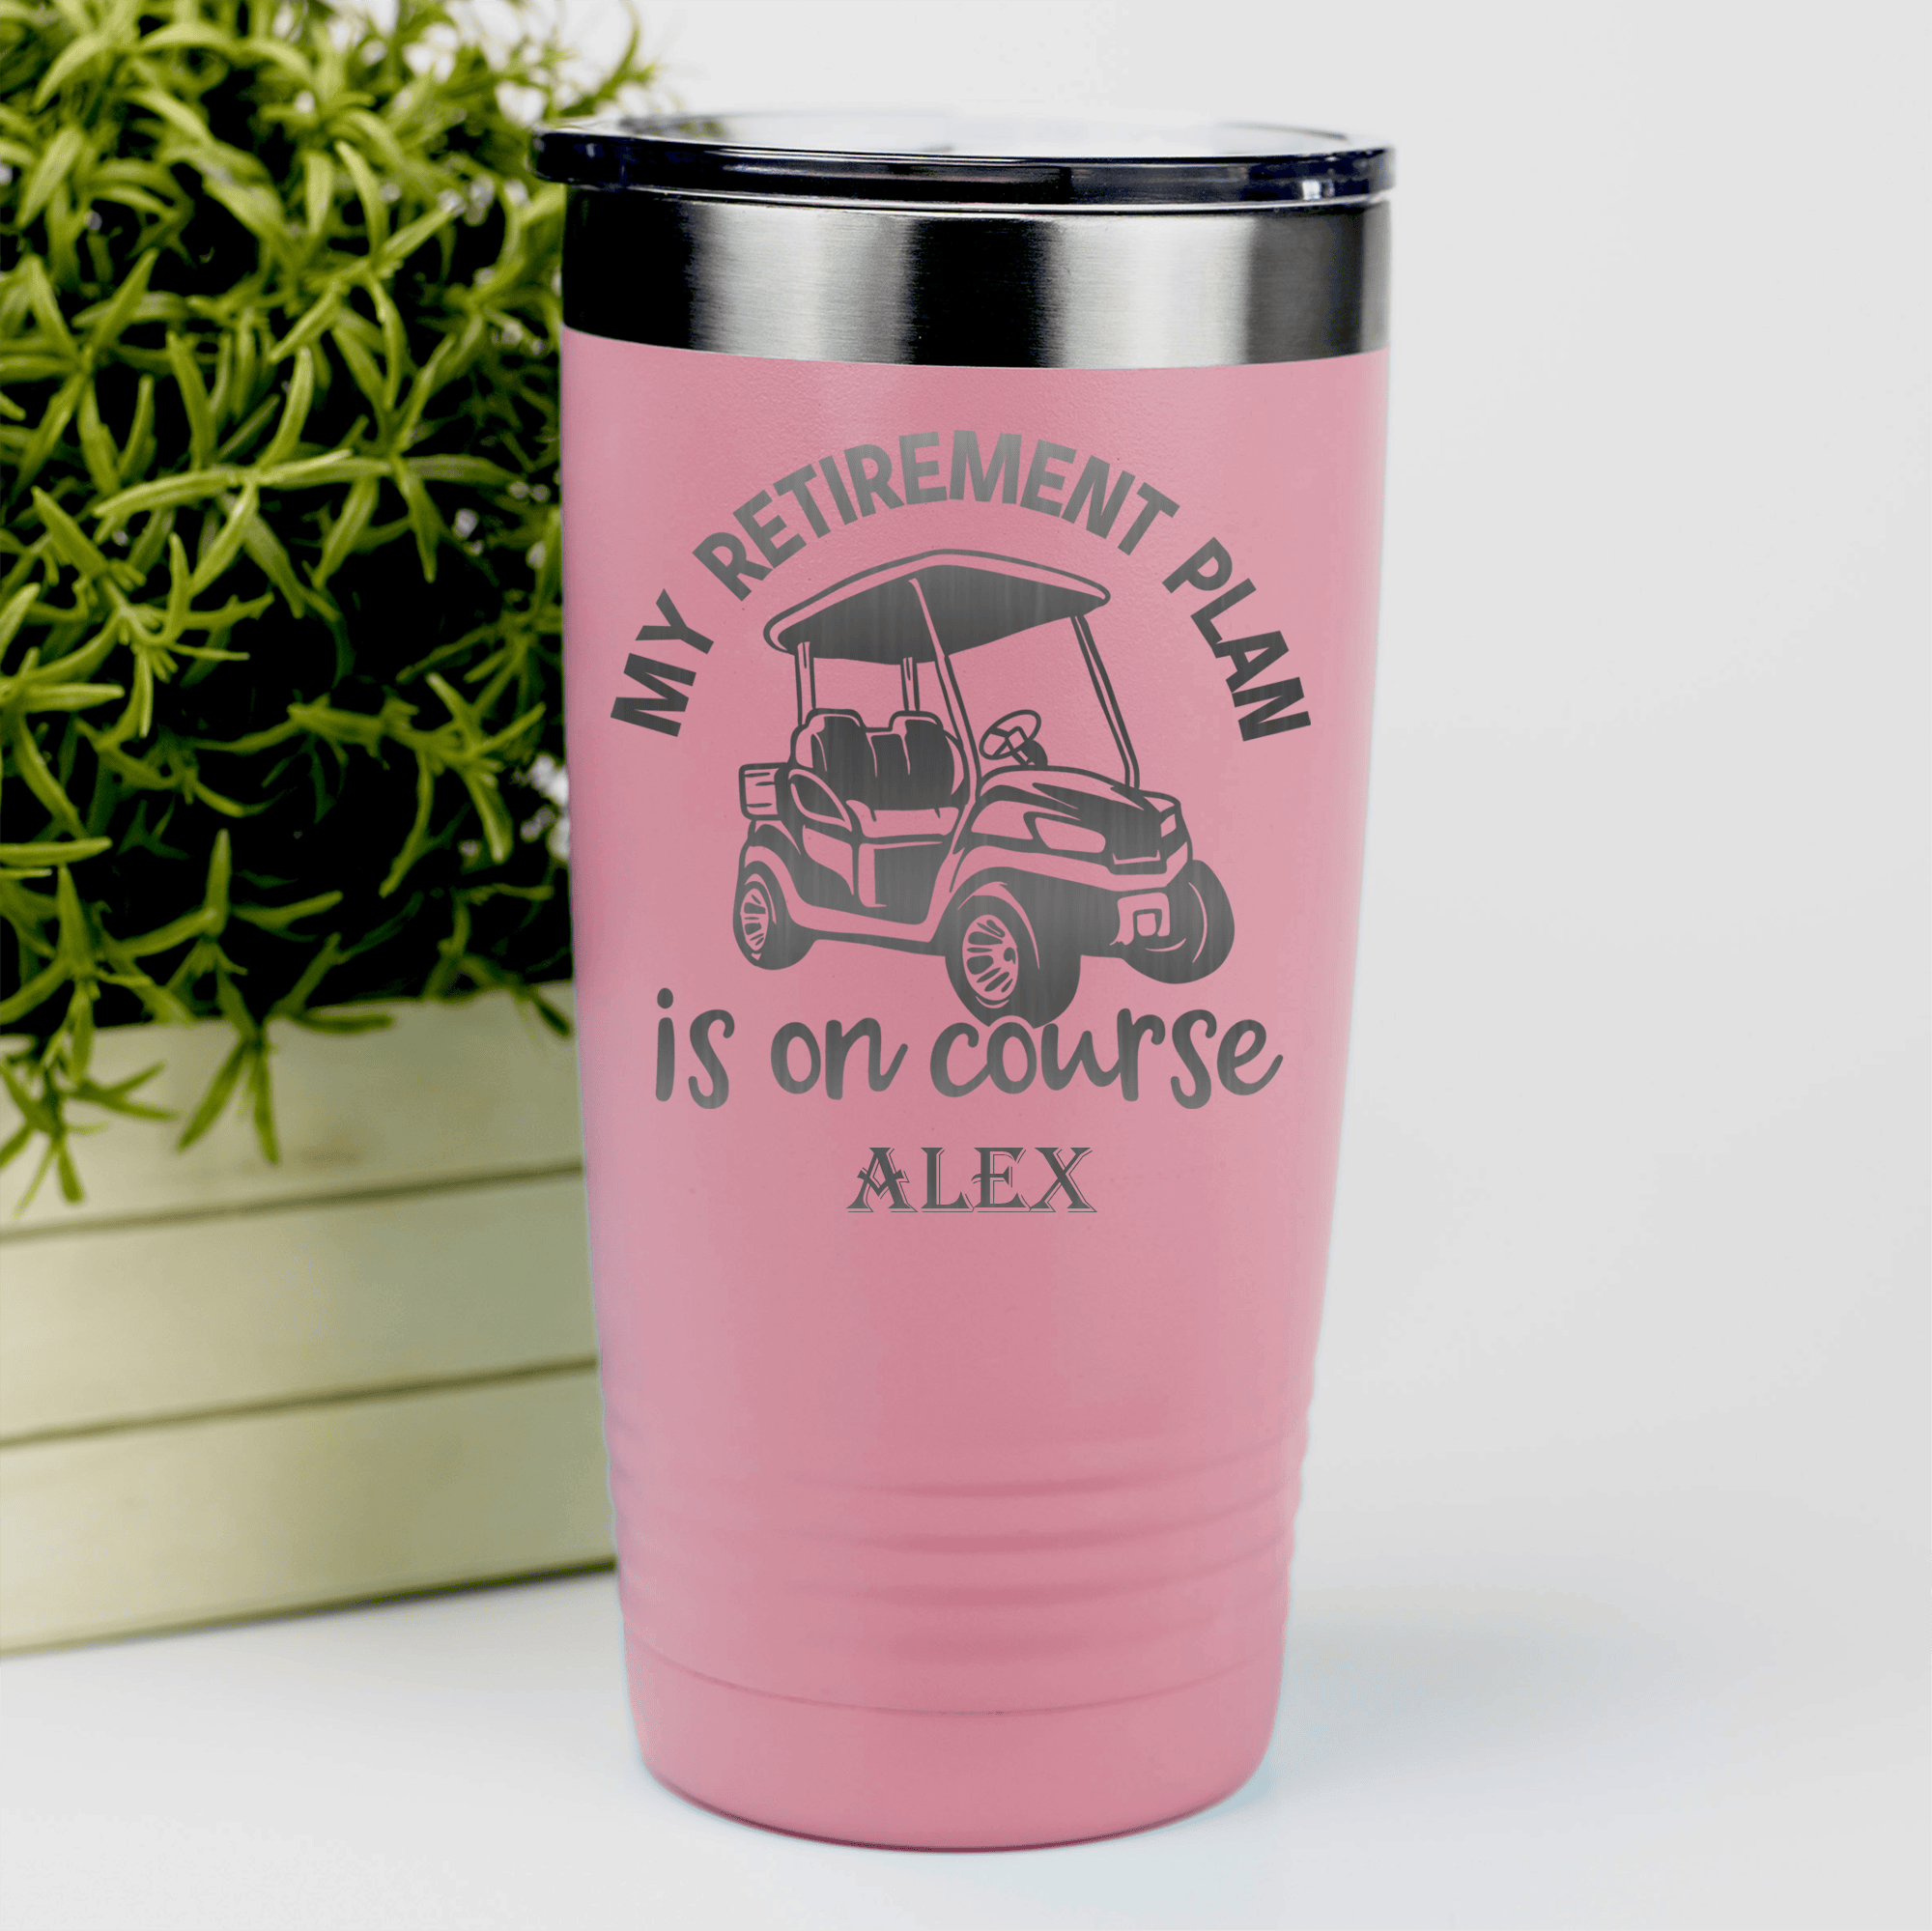 Salmon Golf Tumbler With My Retirement Plan Is On Course Design